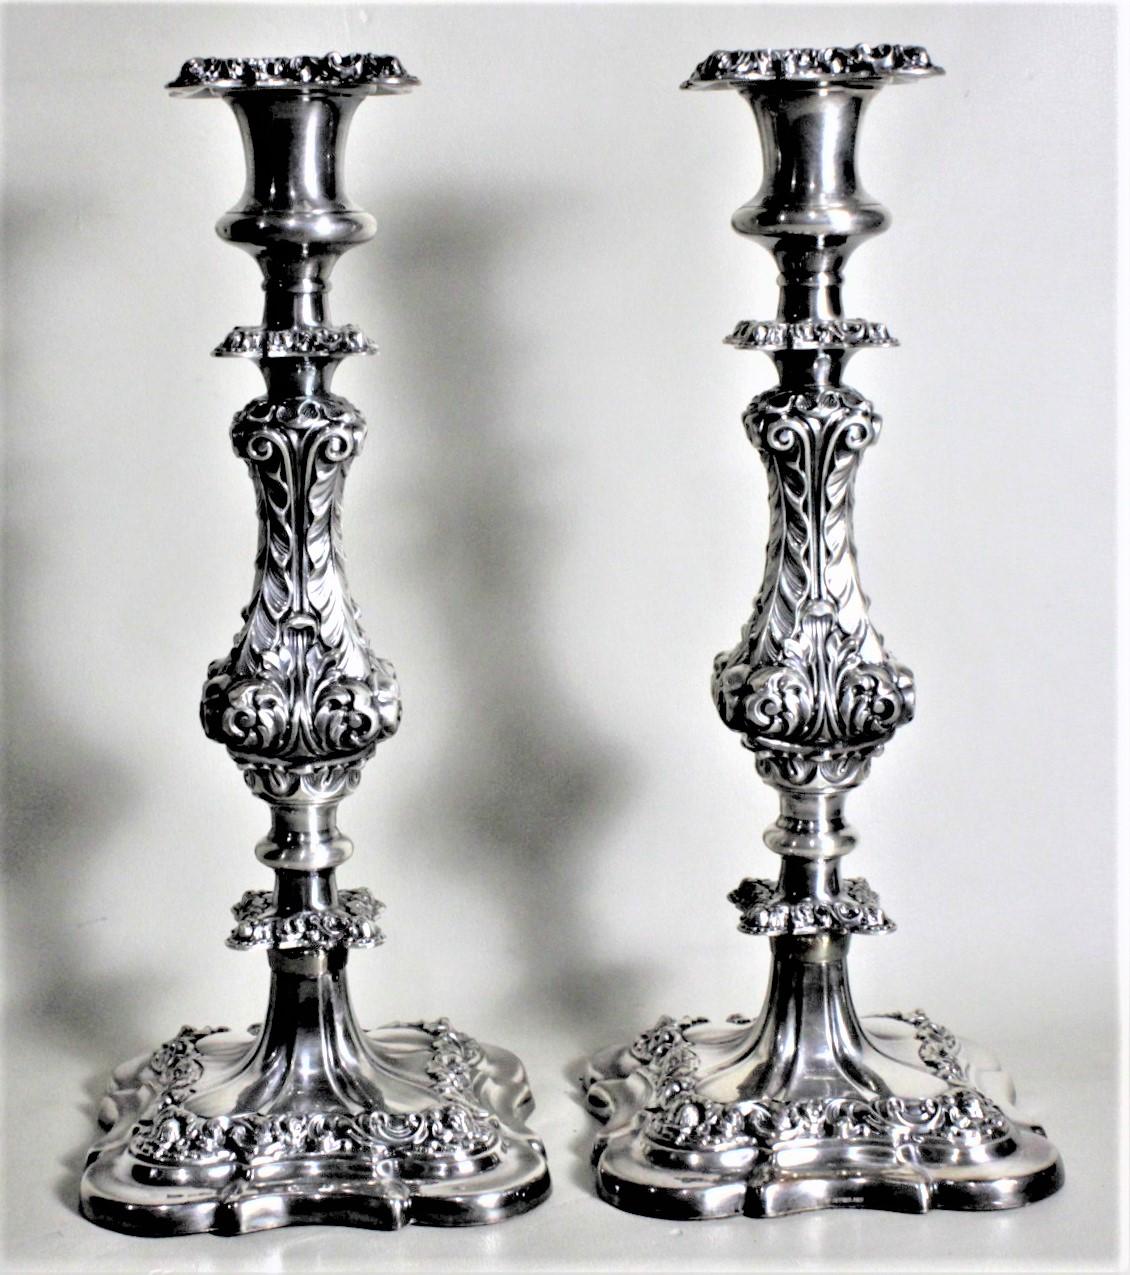 Pair of Antique English Silver Plated Candlesticks with Chased Leaf Decoration In Good Condition For Sale In Hamilton, Ontario